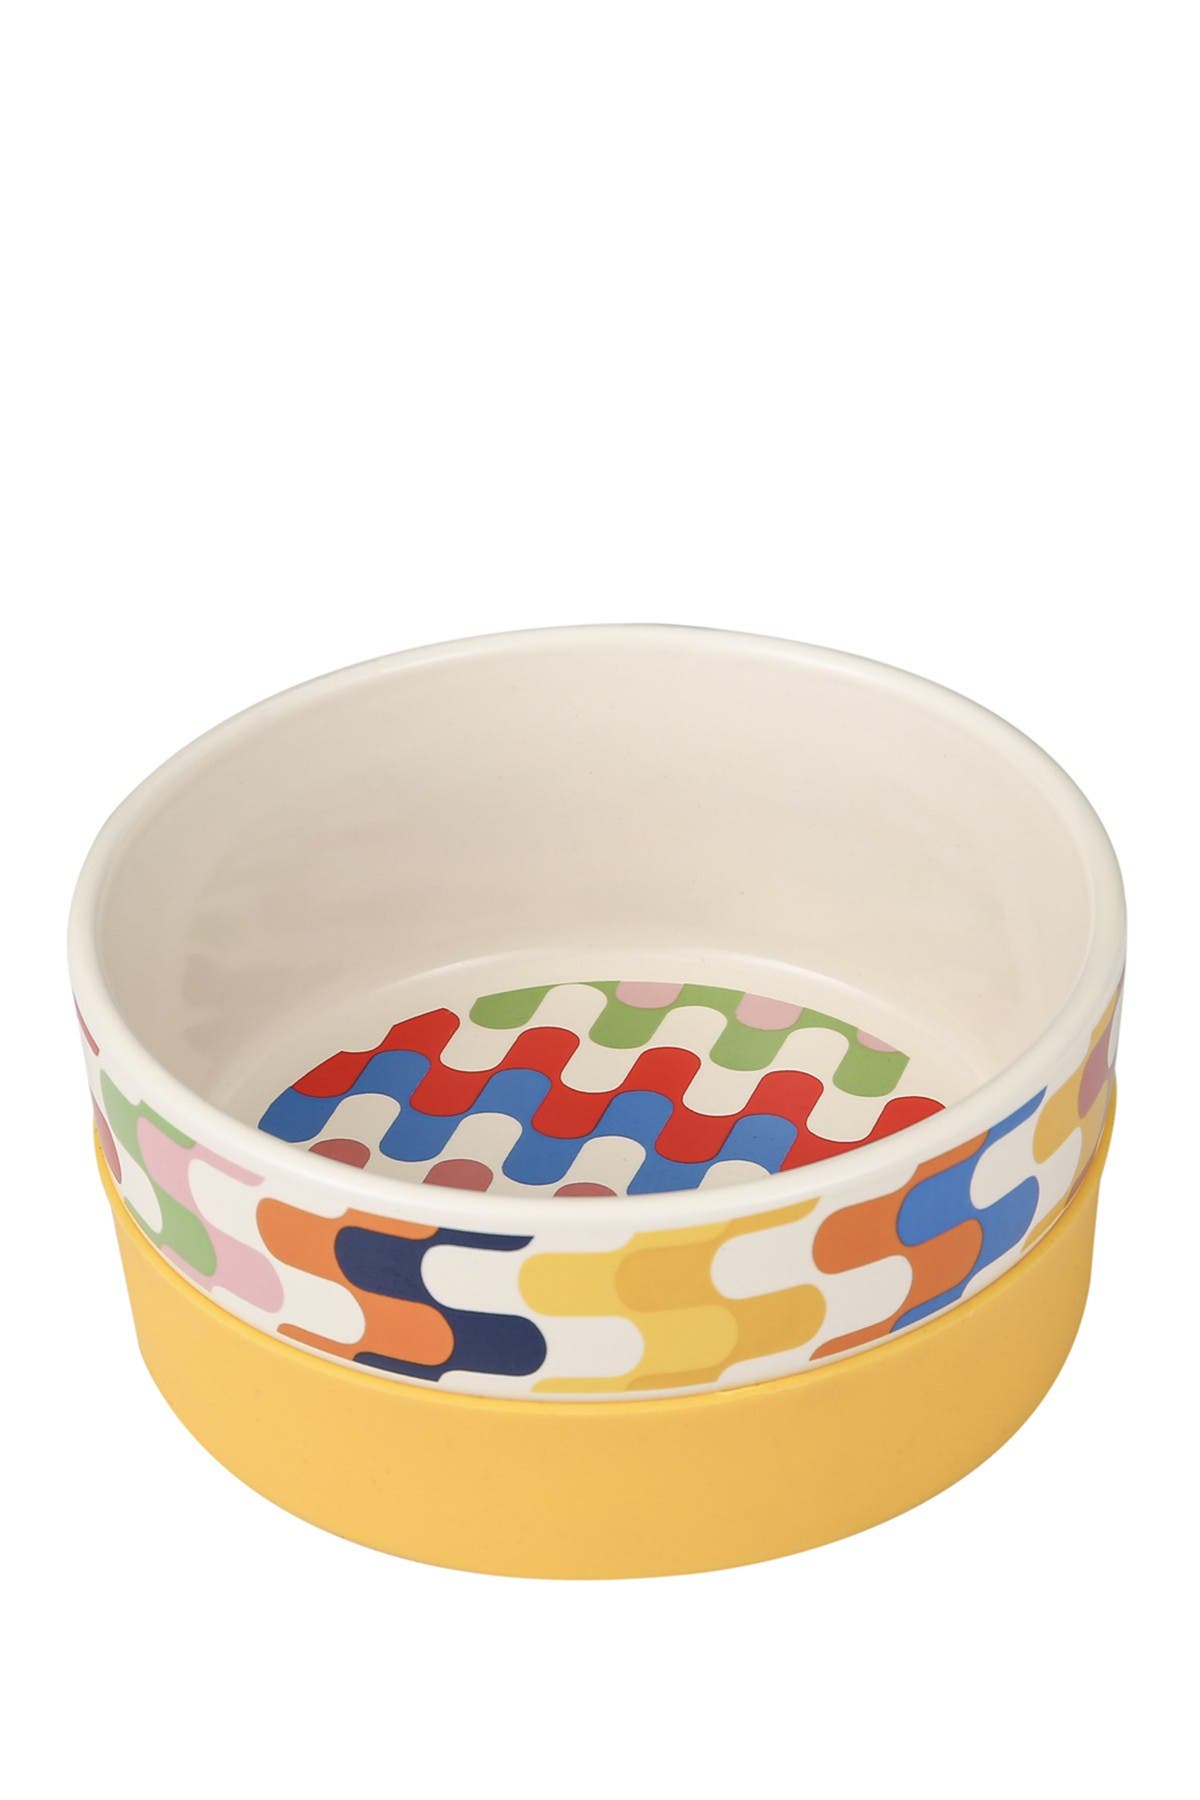 Fetch 4 Pets Jonathan Adler: Now House "bargello" Duo Dog Bowl In Multi